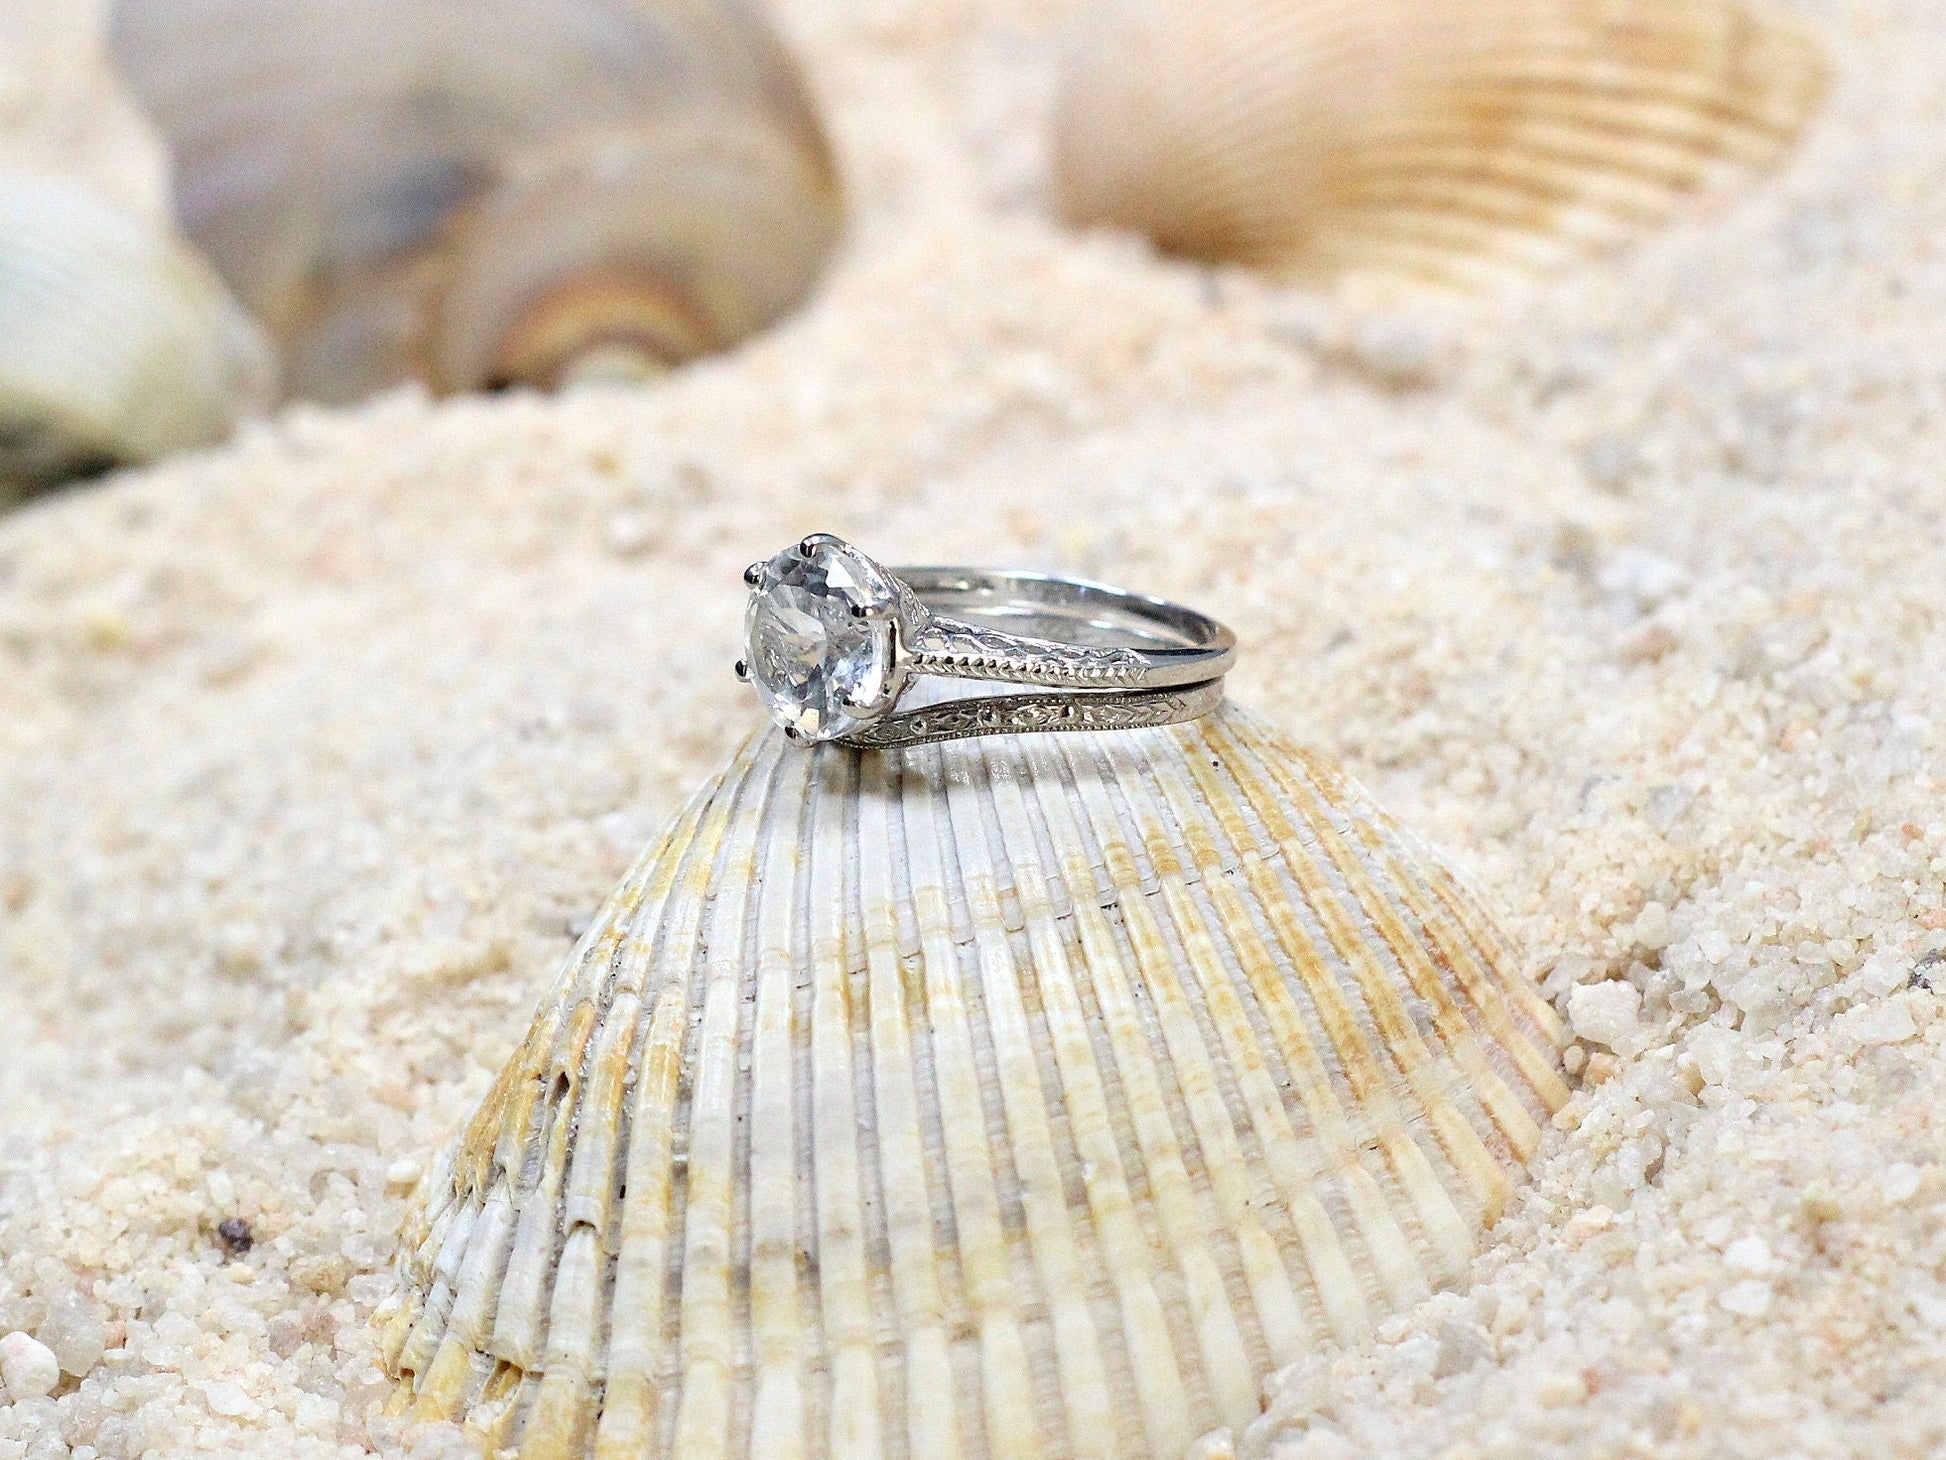 Forever One Moissanite Engagement Ring Set, Wedding Band, Antique, Filigree,Vintage, Round, Maia ,3ct, 9mm, gift for her, promise ring BellaMoreDesign.com